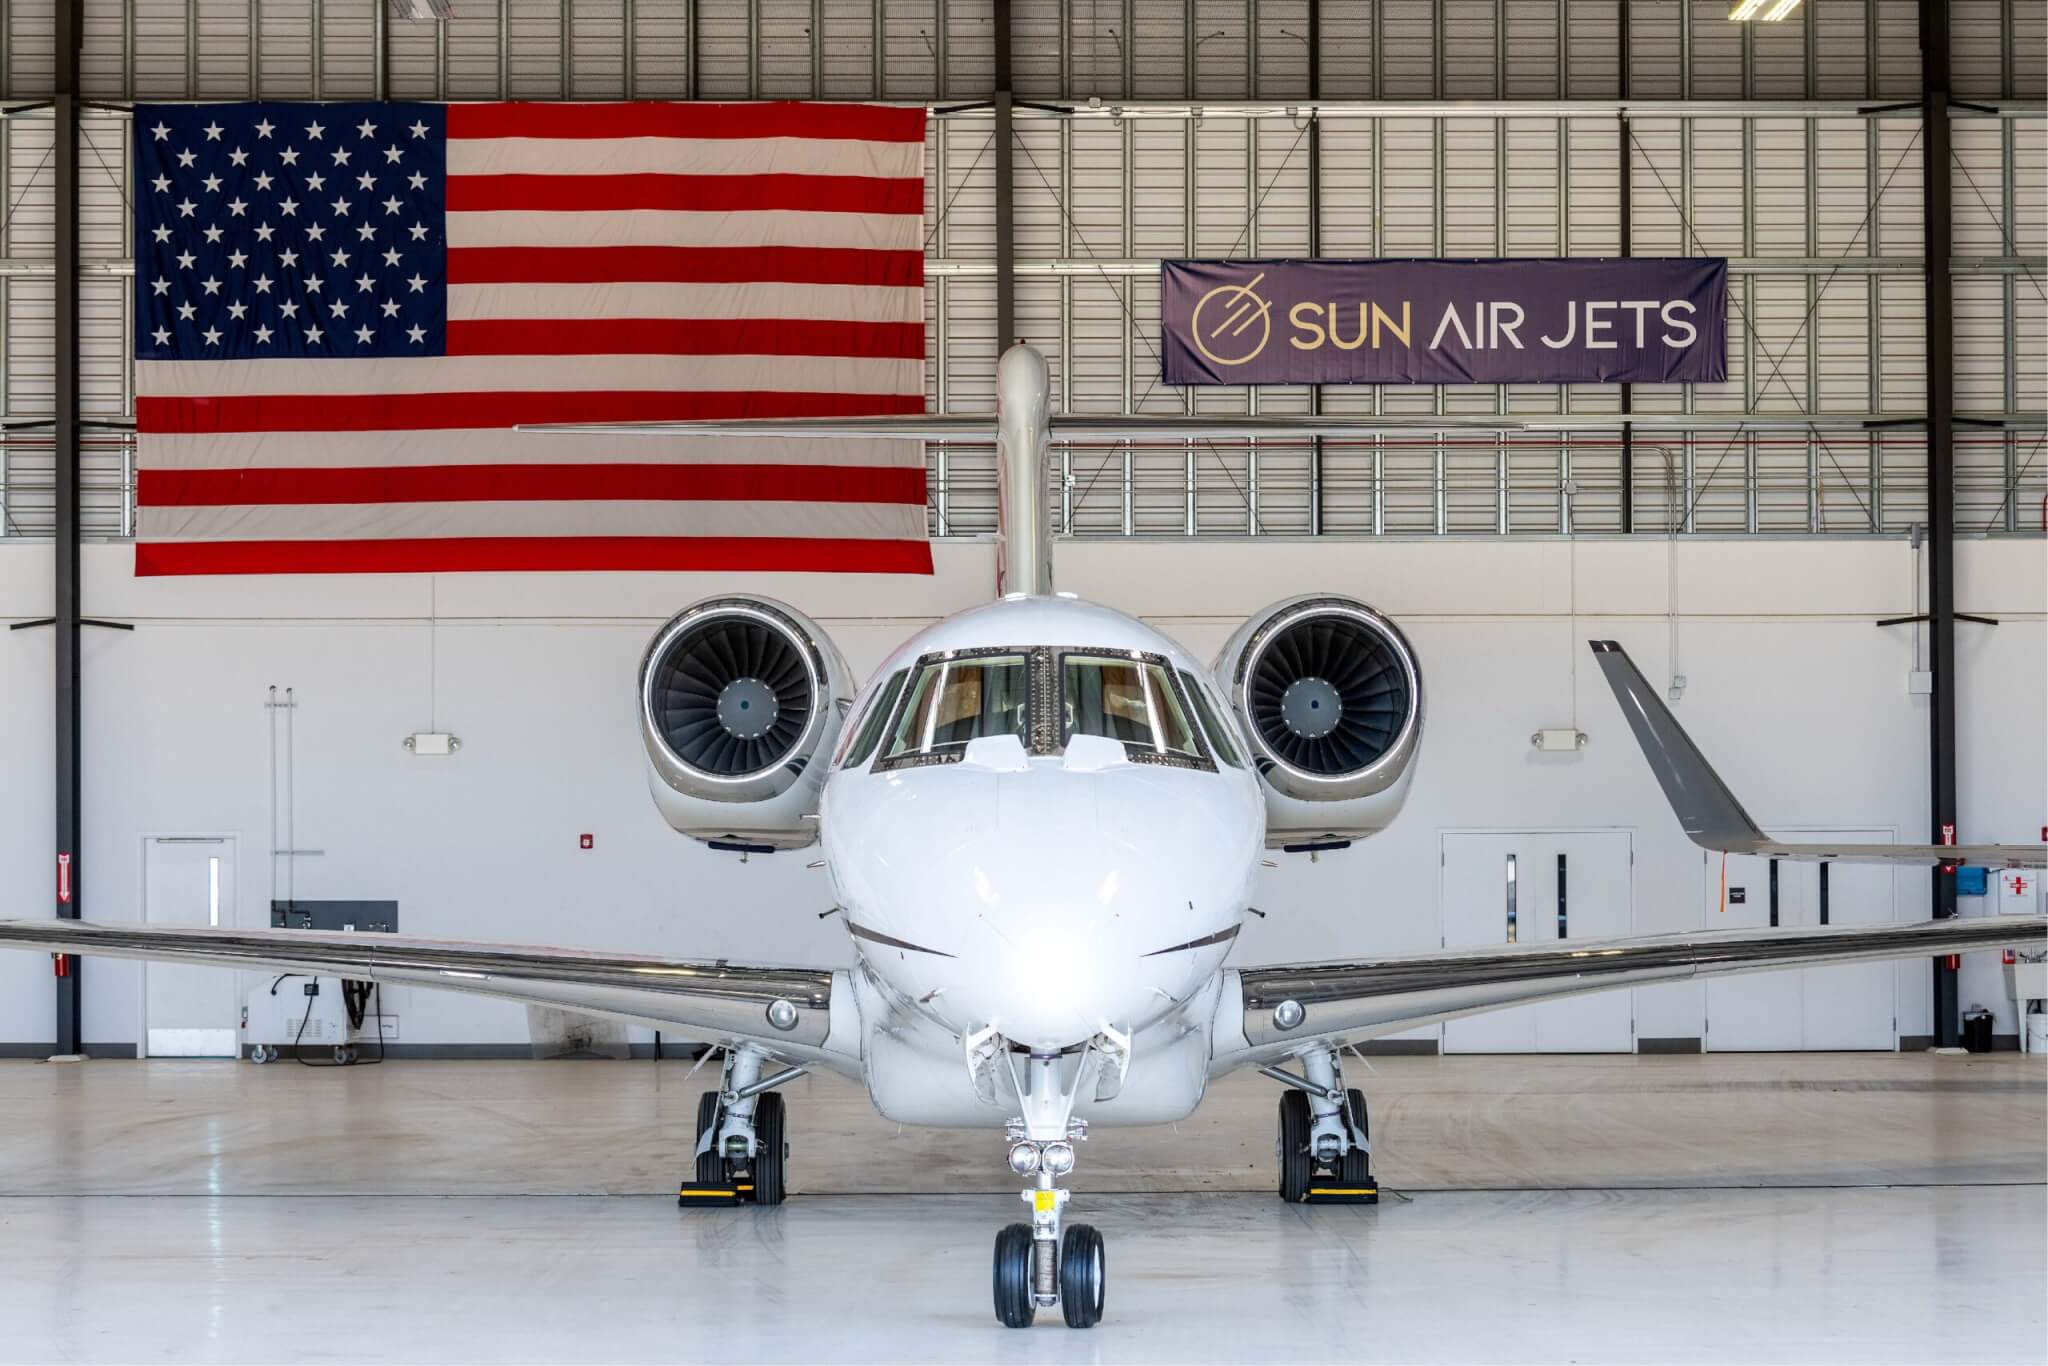 Full Revenue Sharing For Private Jet Management - Sun Air Jets